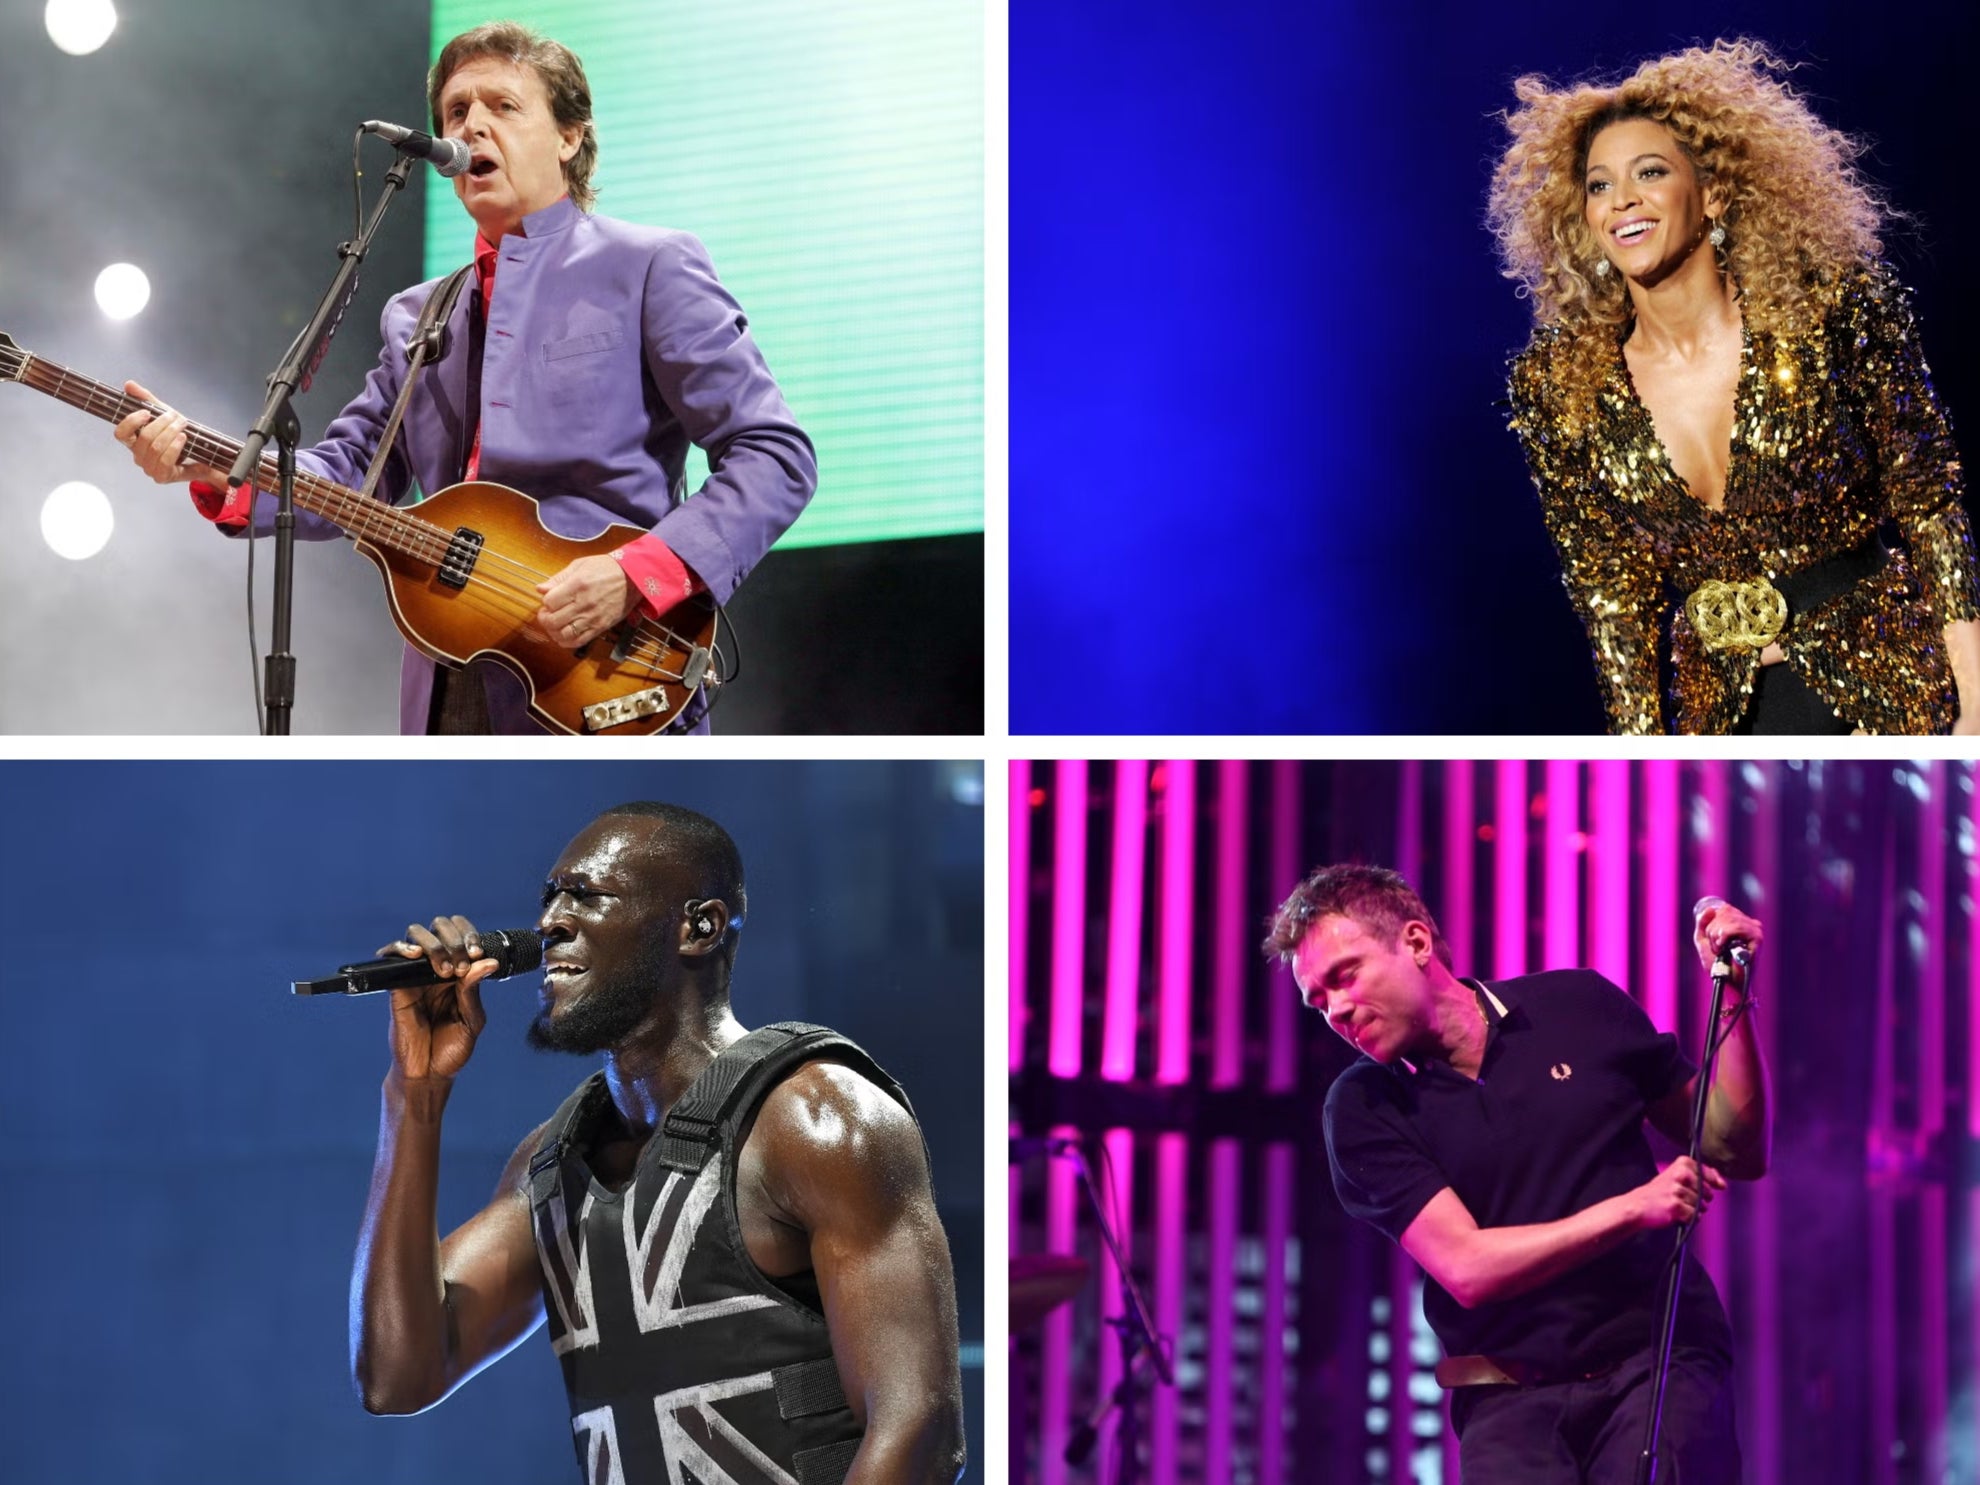 Top left clockwise: Paul McCartney, Beyonce, Damon Albarn of Blur, and Stormzy, during their headline performances on the Pyramid Stage